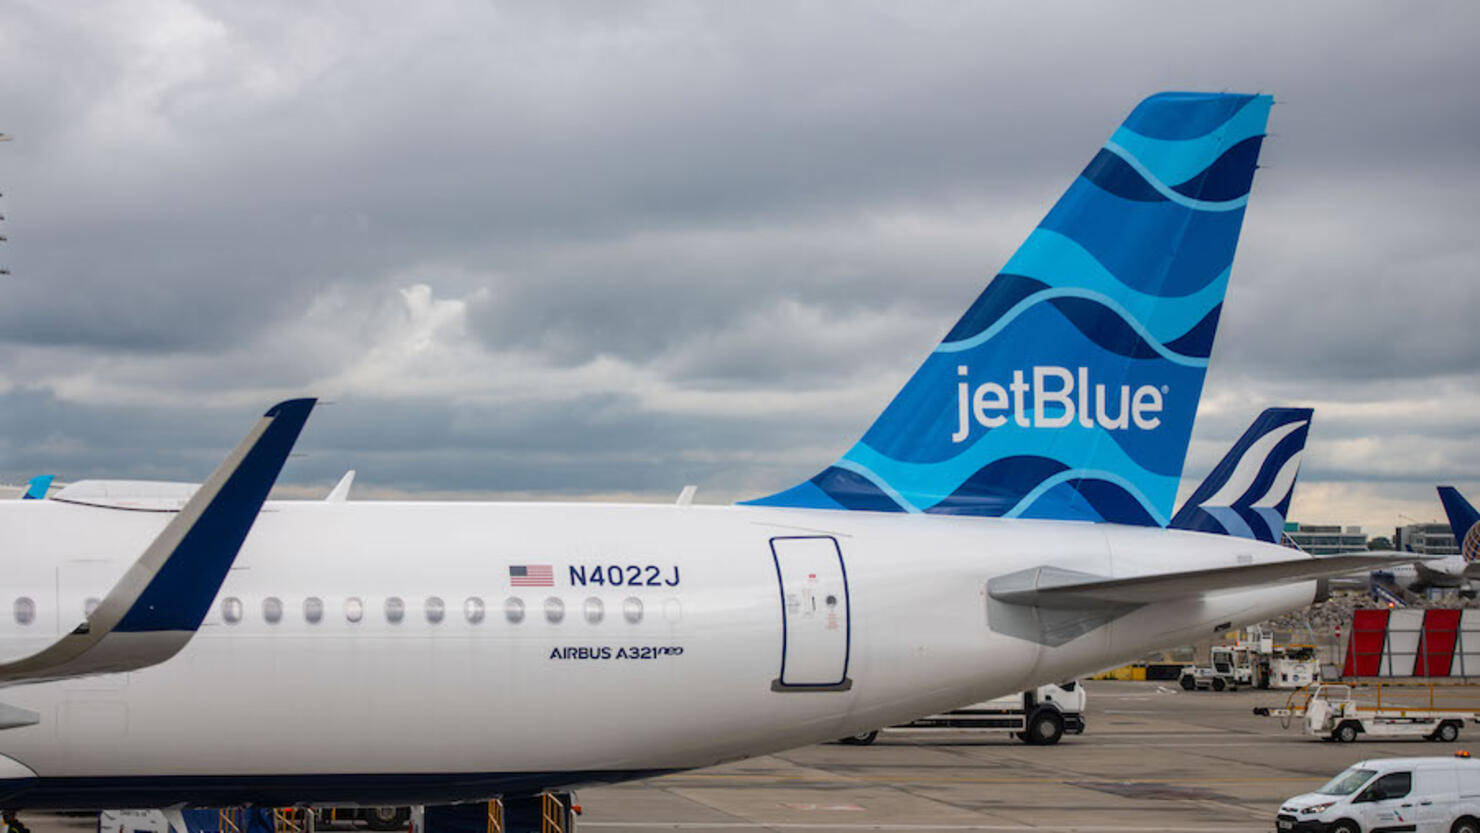 JetBlue Debuts New York-to-London Direct Flights as Low as $202